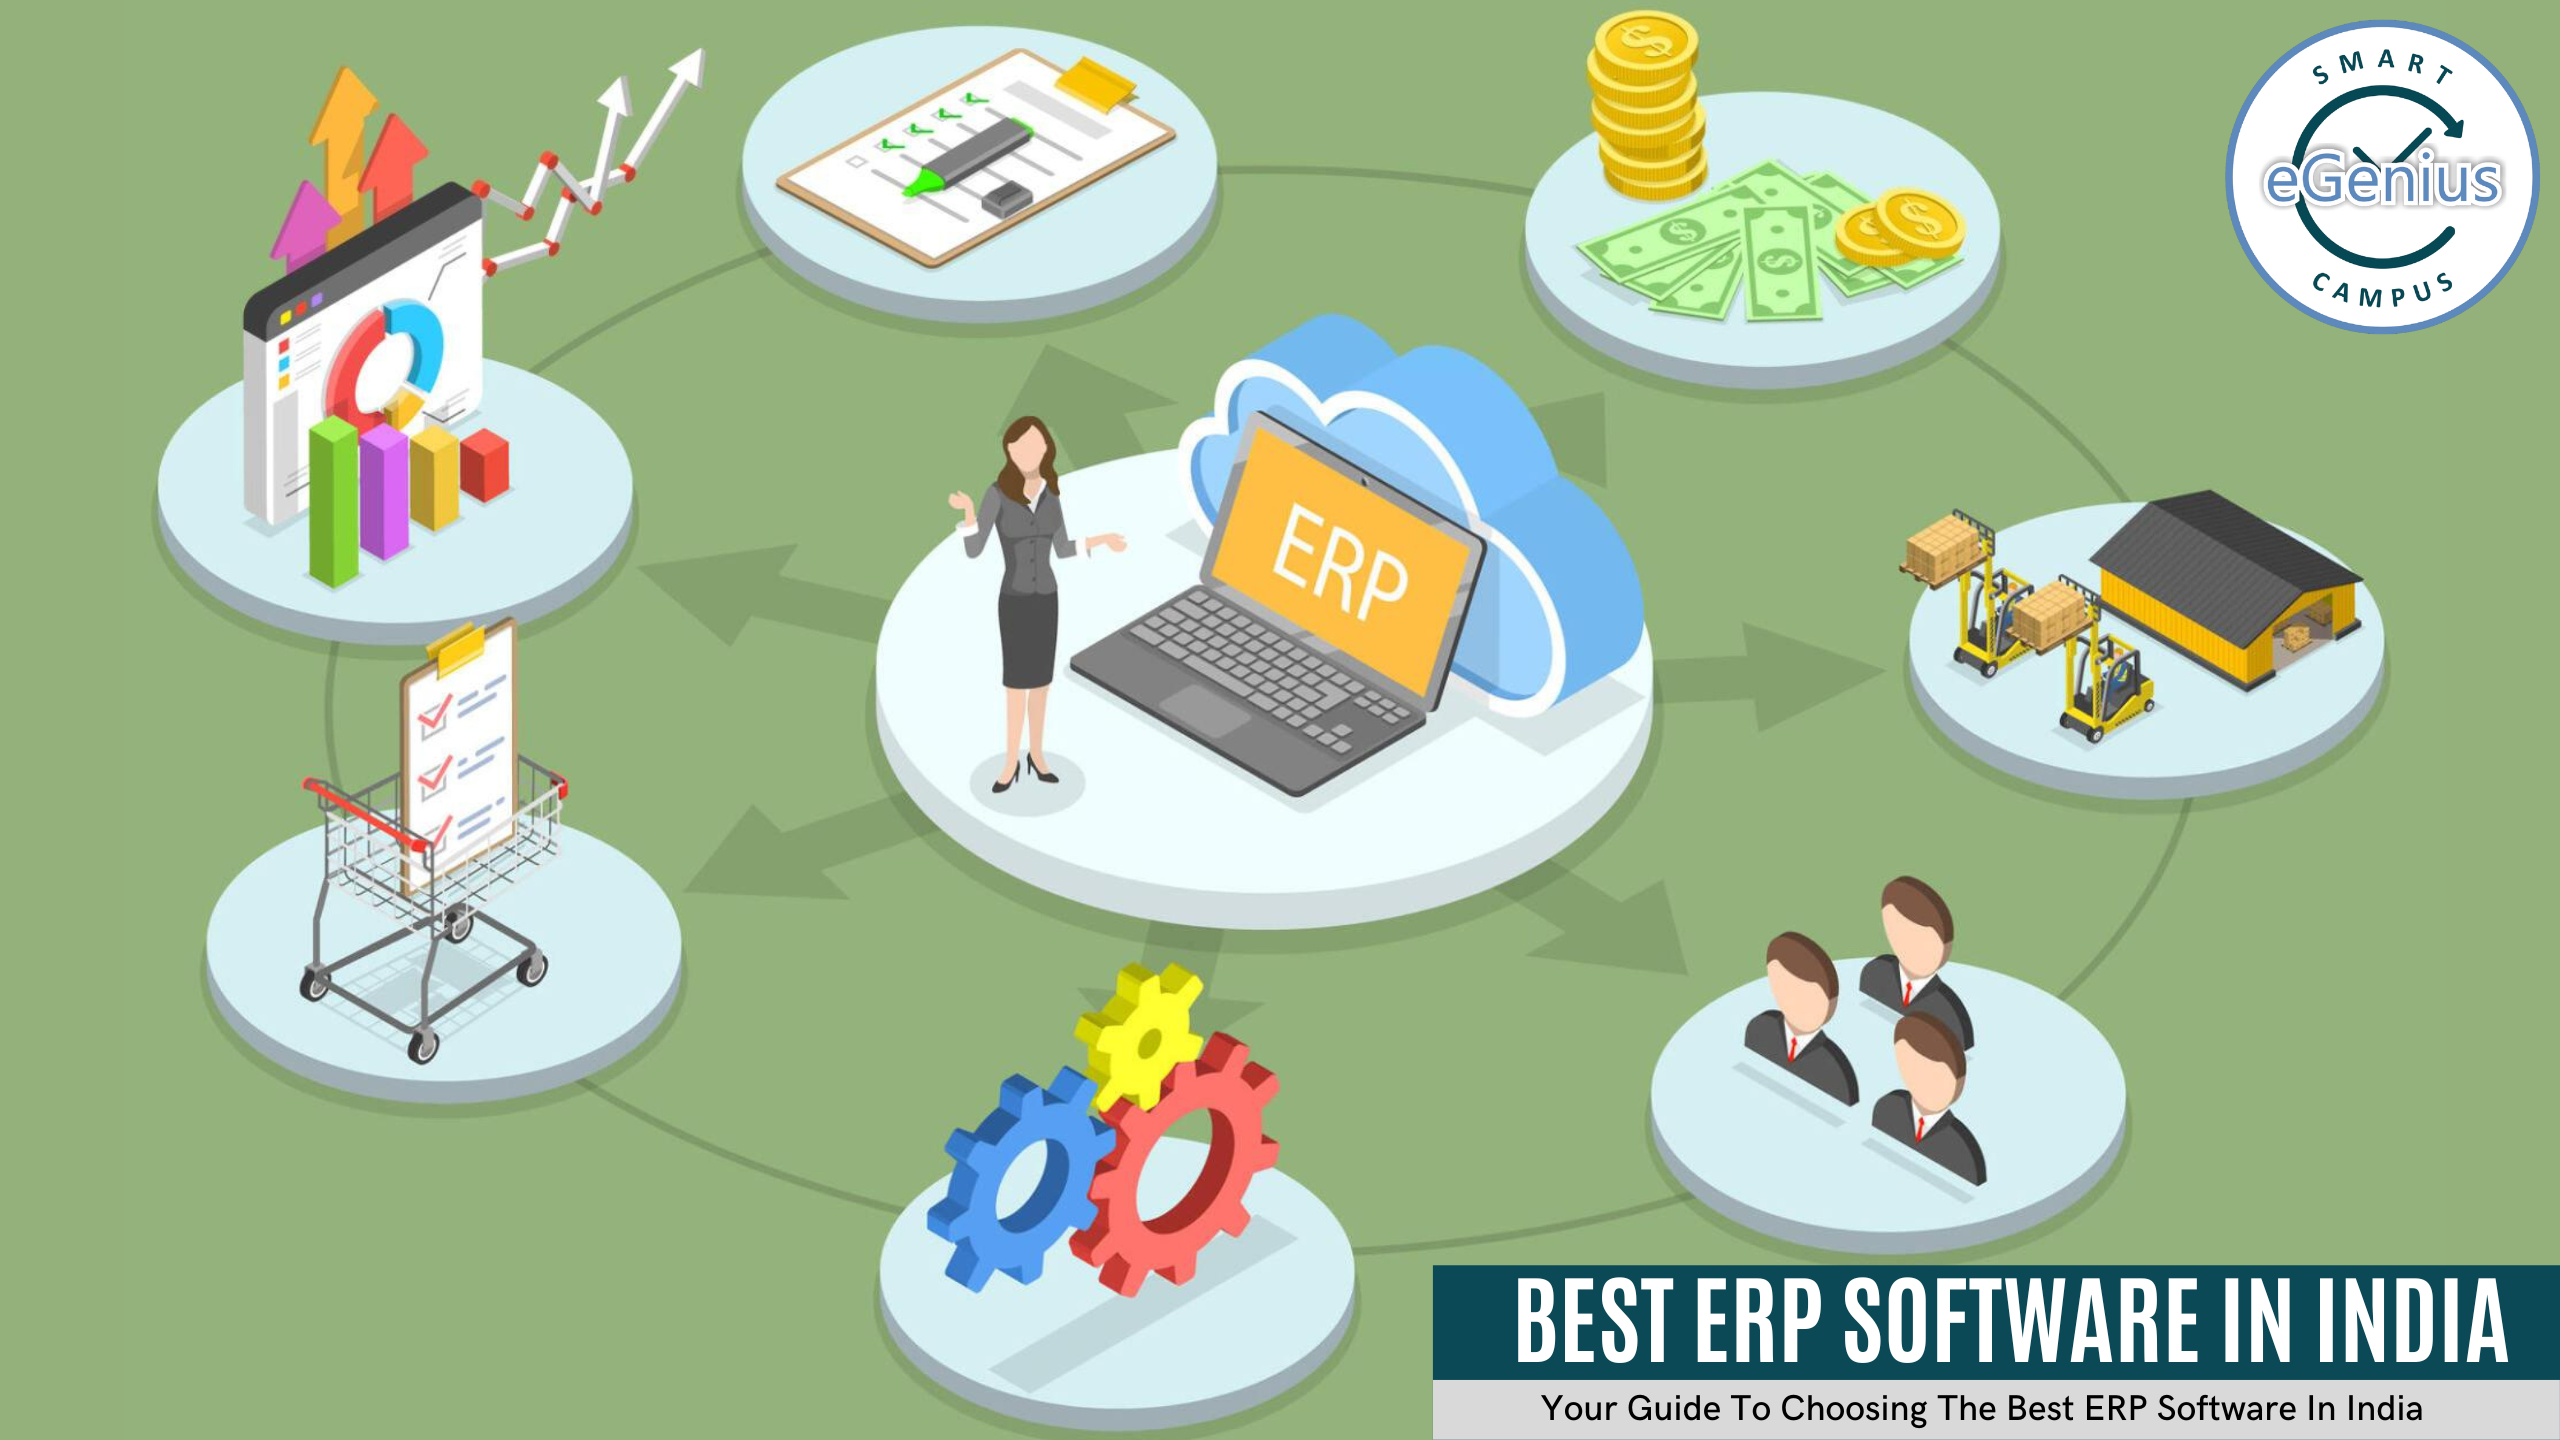 Best ERP Software in India: Choosing the right software